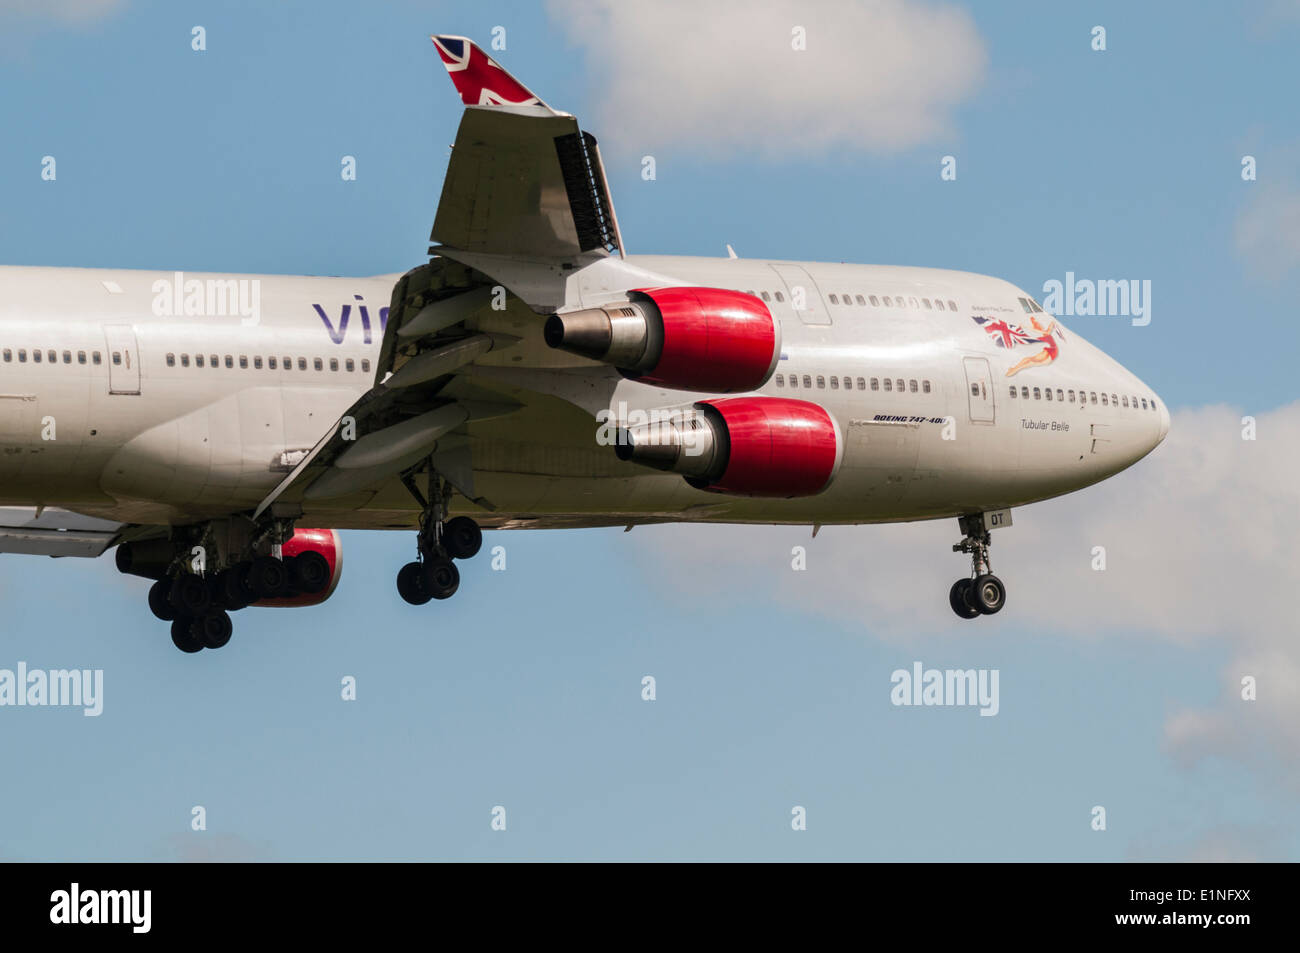 Side view of the front and wings of a Virgin Atlantic Airlines Boeing 747 on approach to land Stock Photo